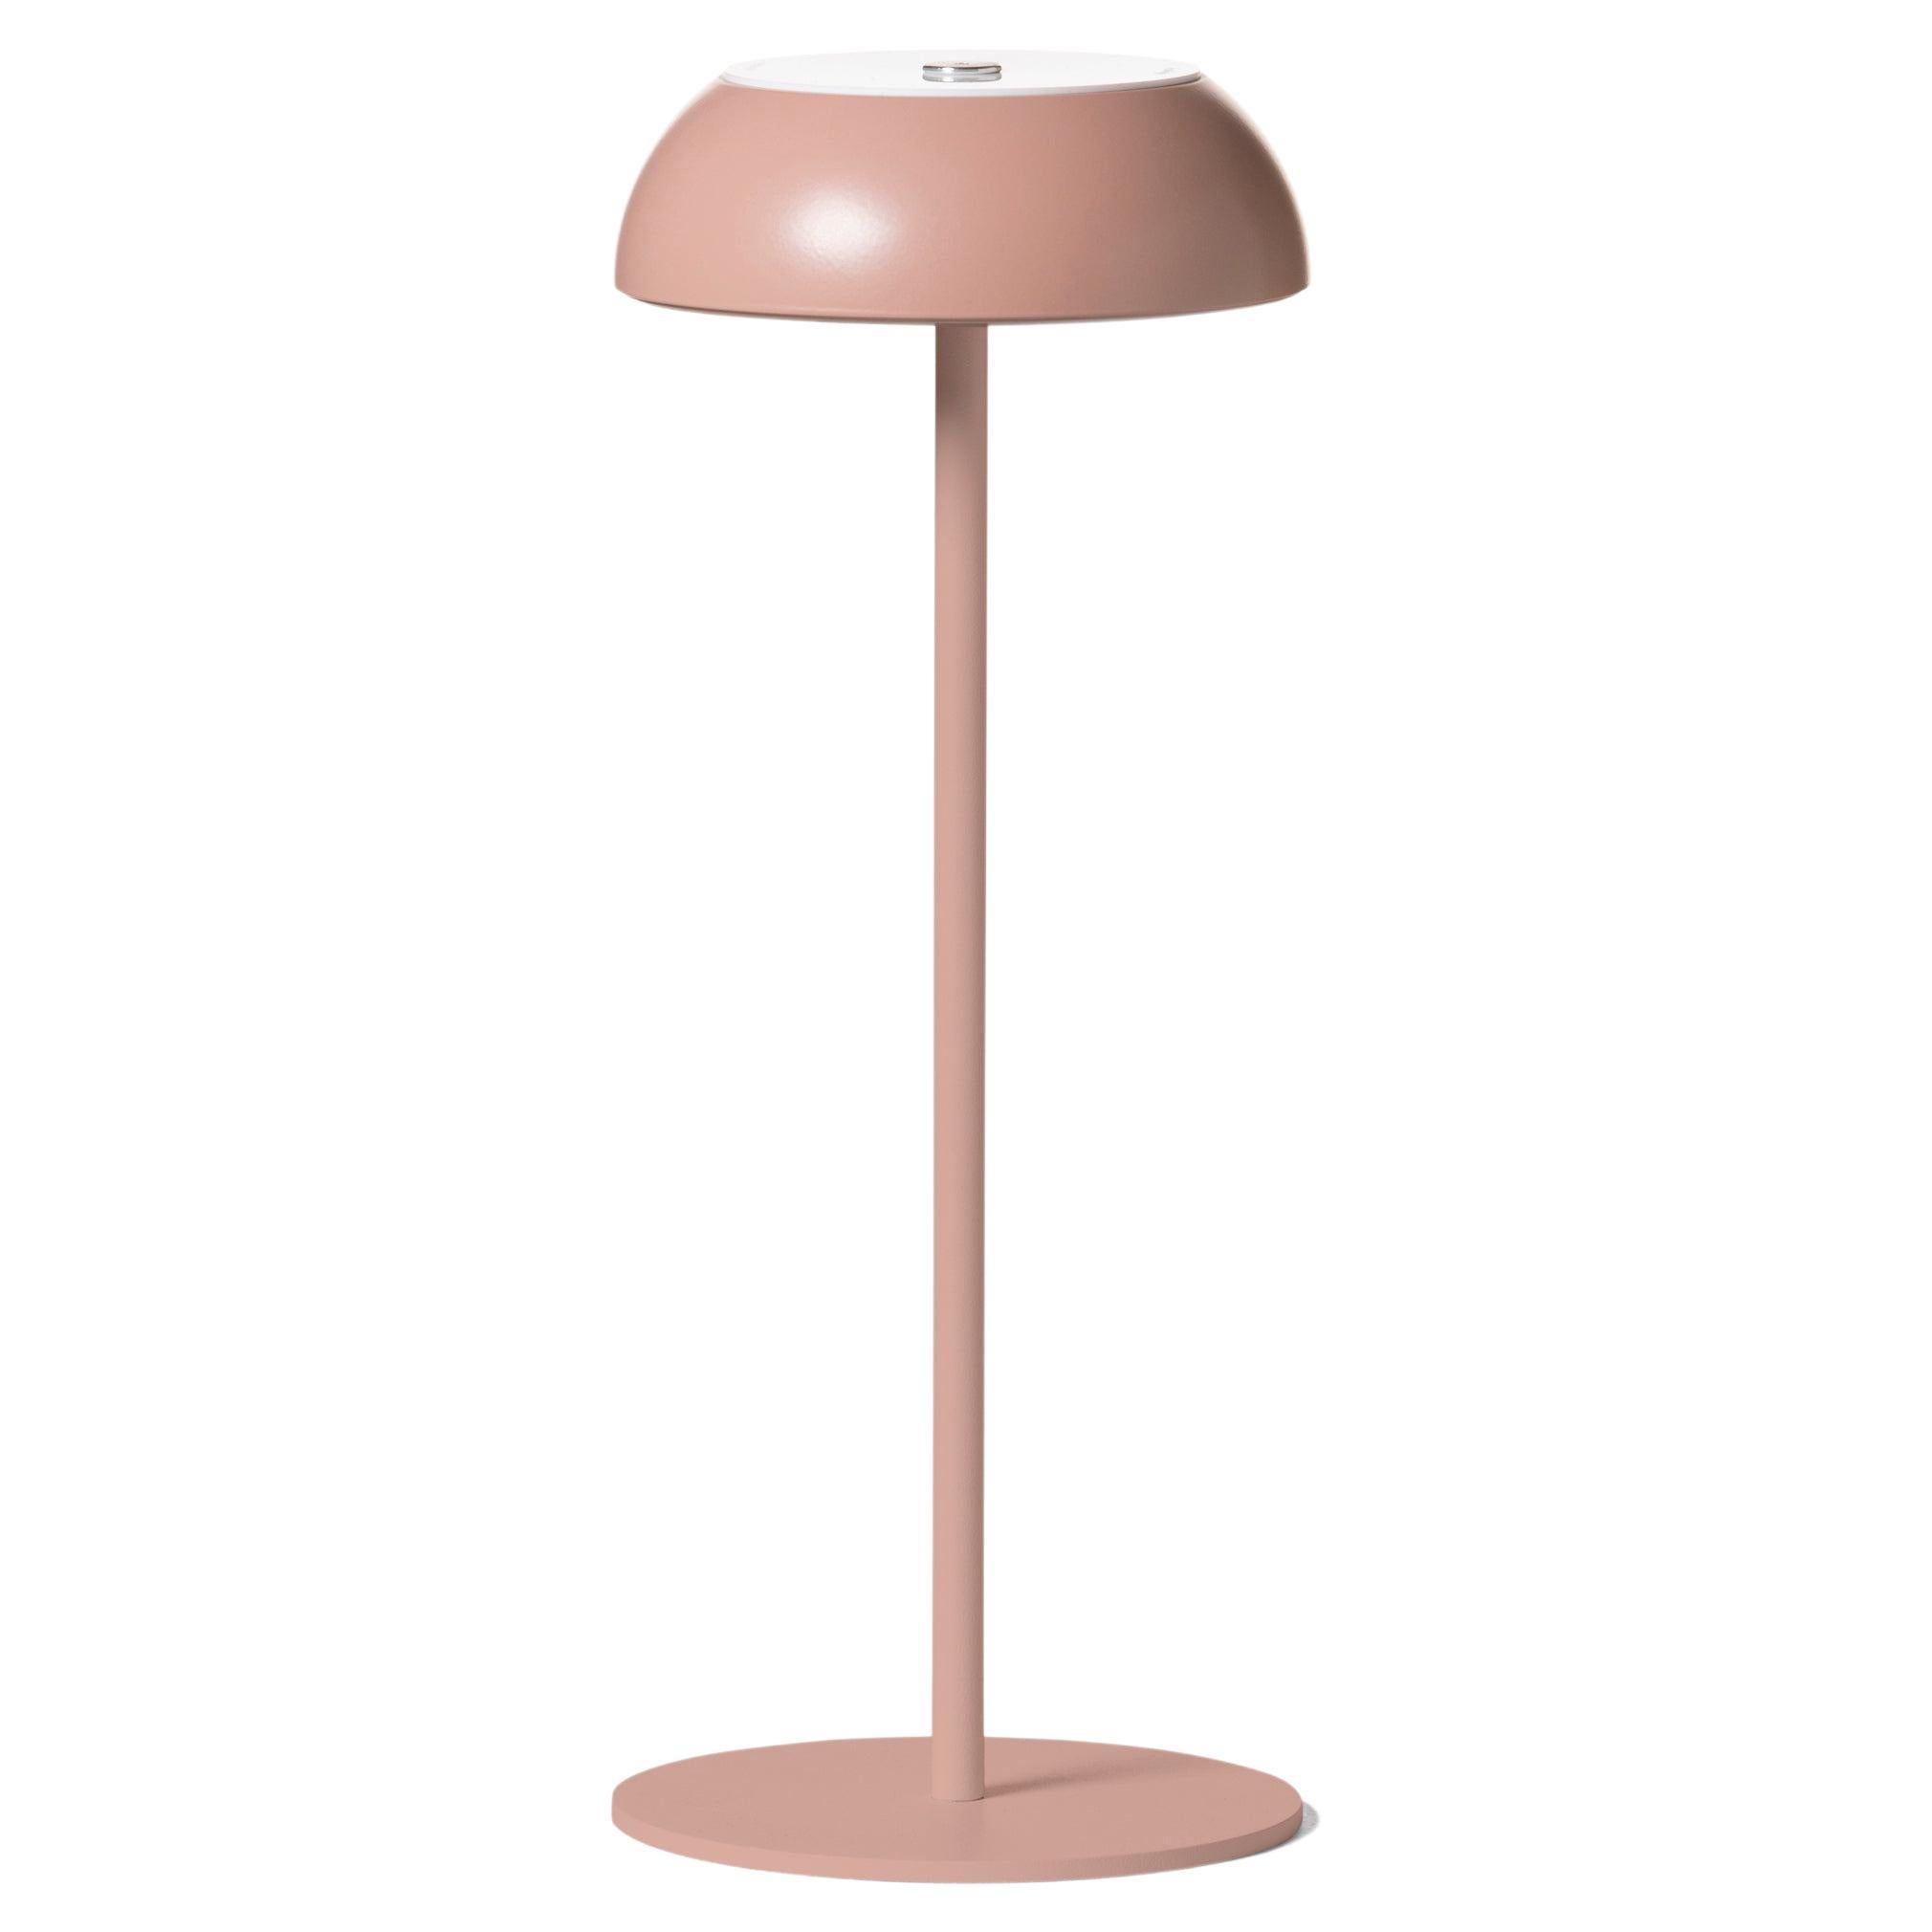 Axolight Float Table Lamp in Mauve Dust Aluminum and Steel by Mario Alessiani For Sale